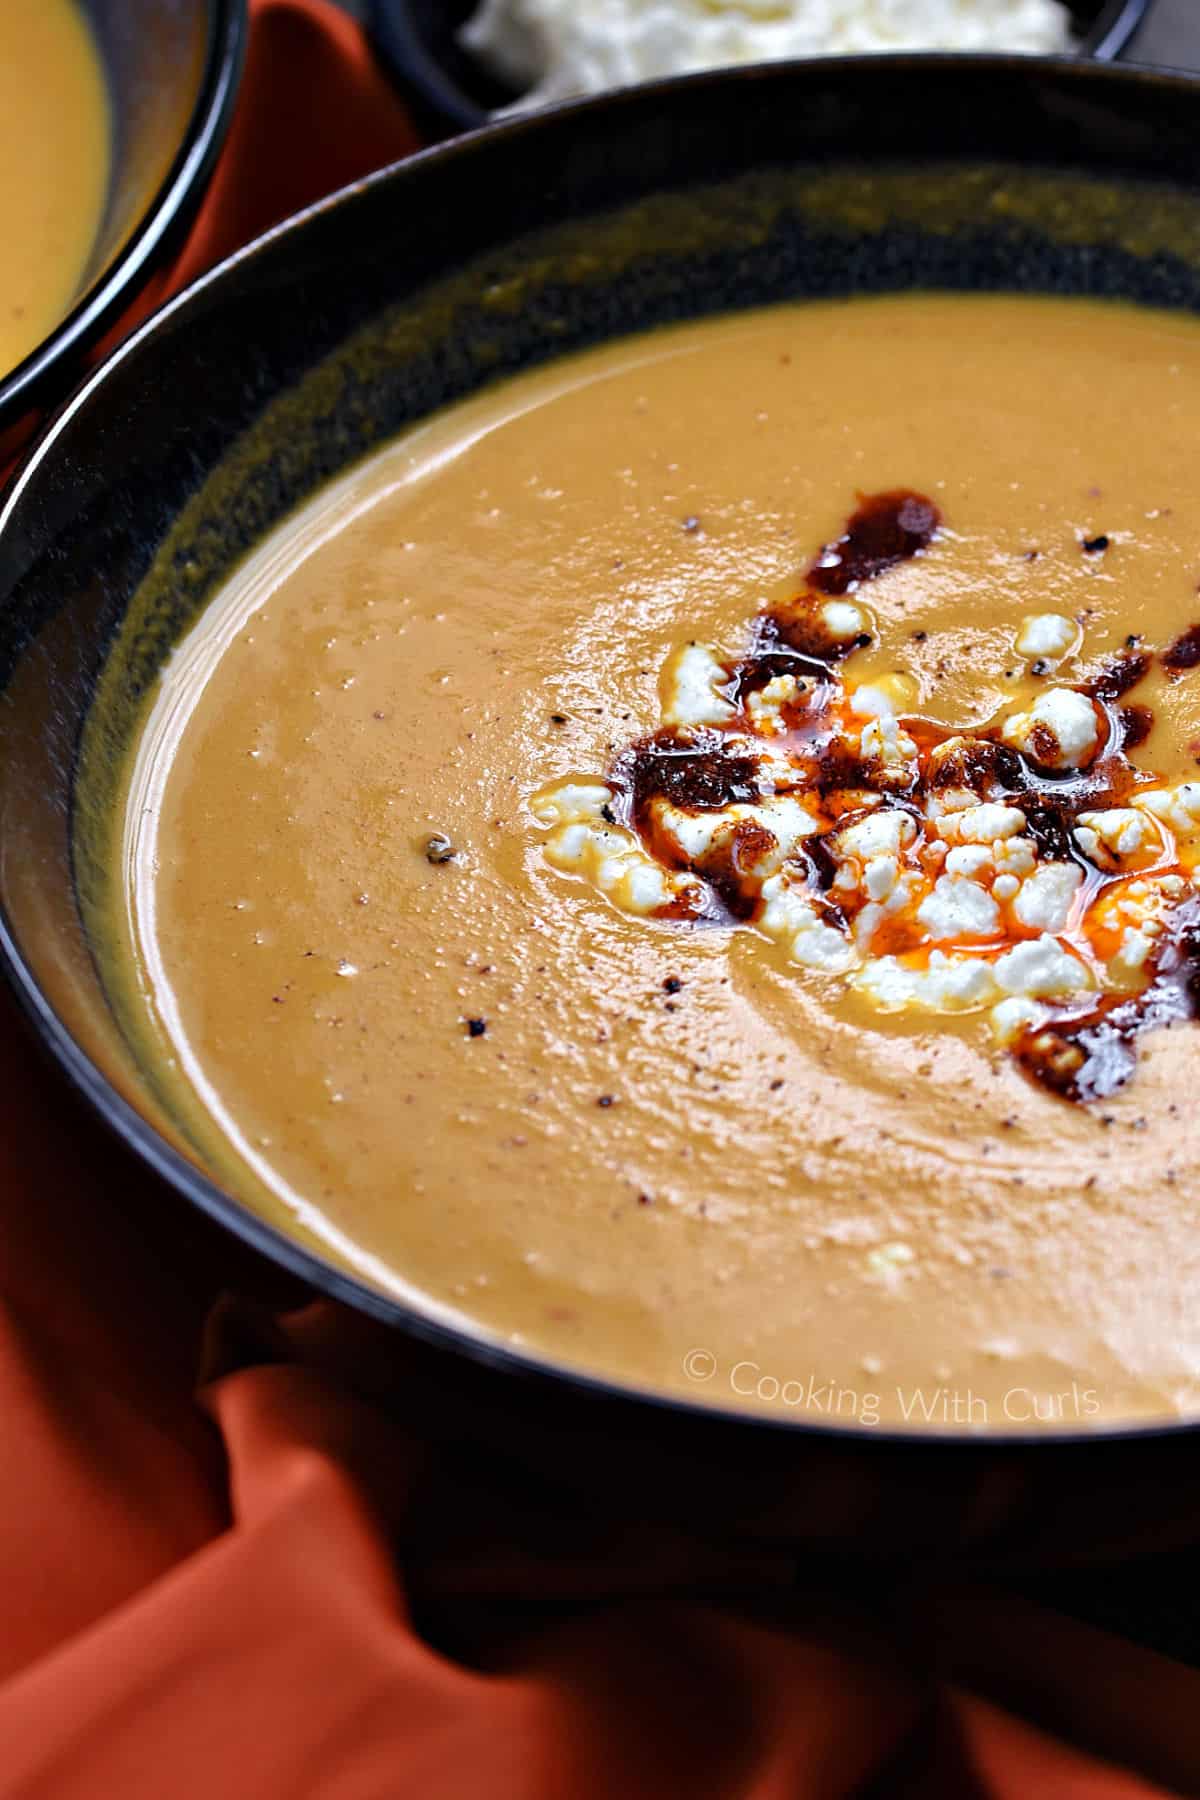 A close-up image of butternut squash soup in a bowl with feta crumbles and chili sauce down the center. 